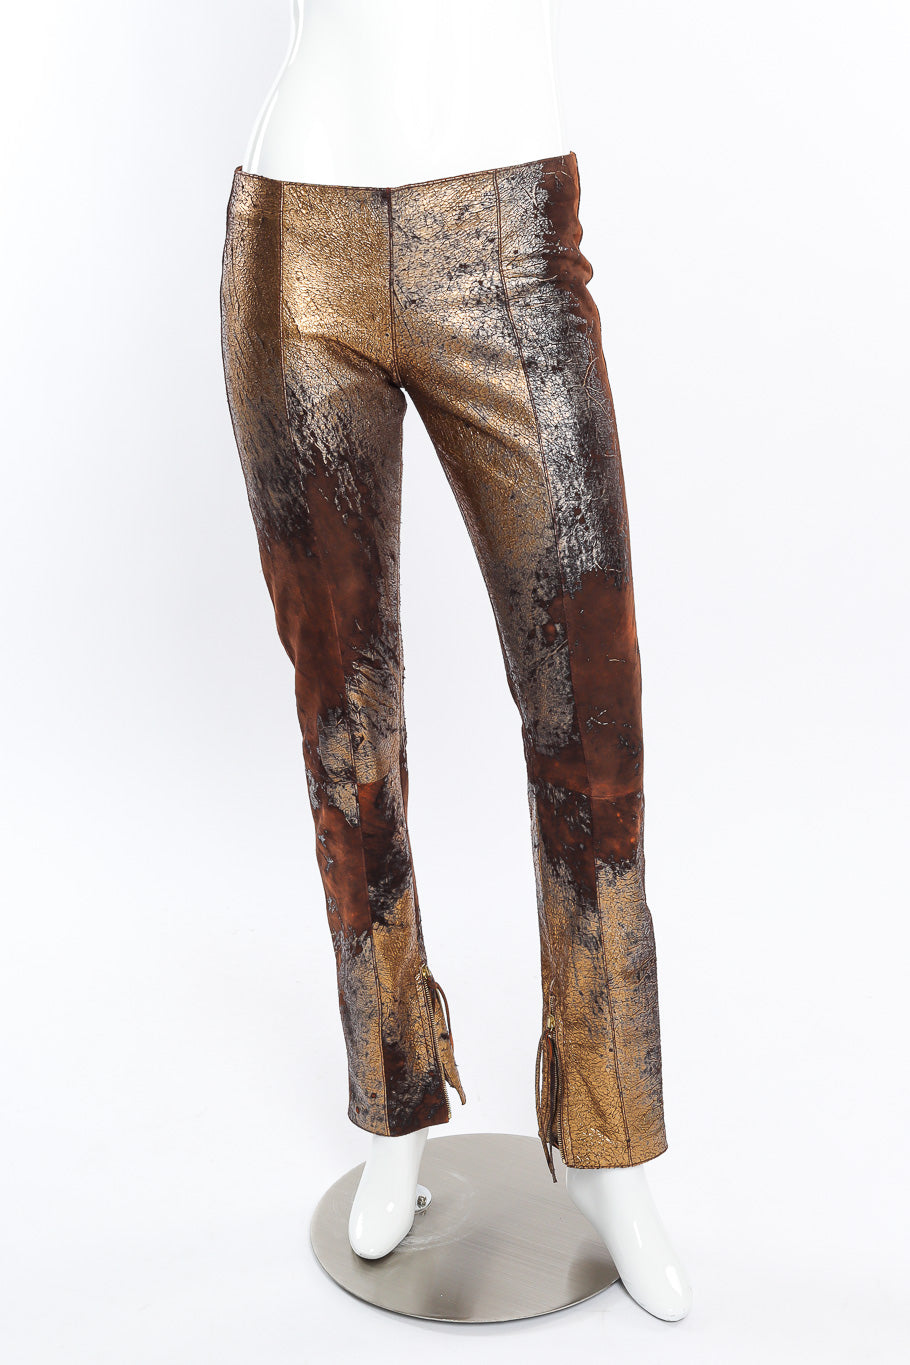 Leather pants by Roberto Cavalli on mannequin front @recessla